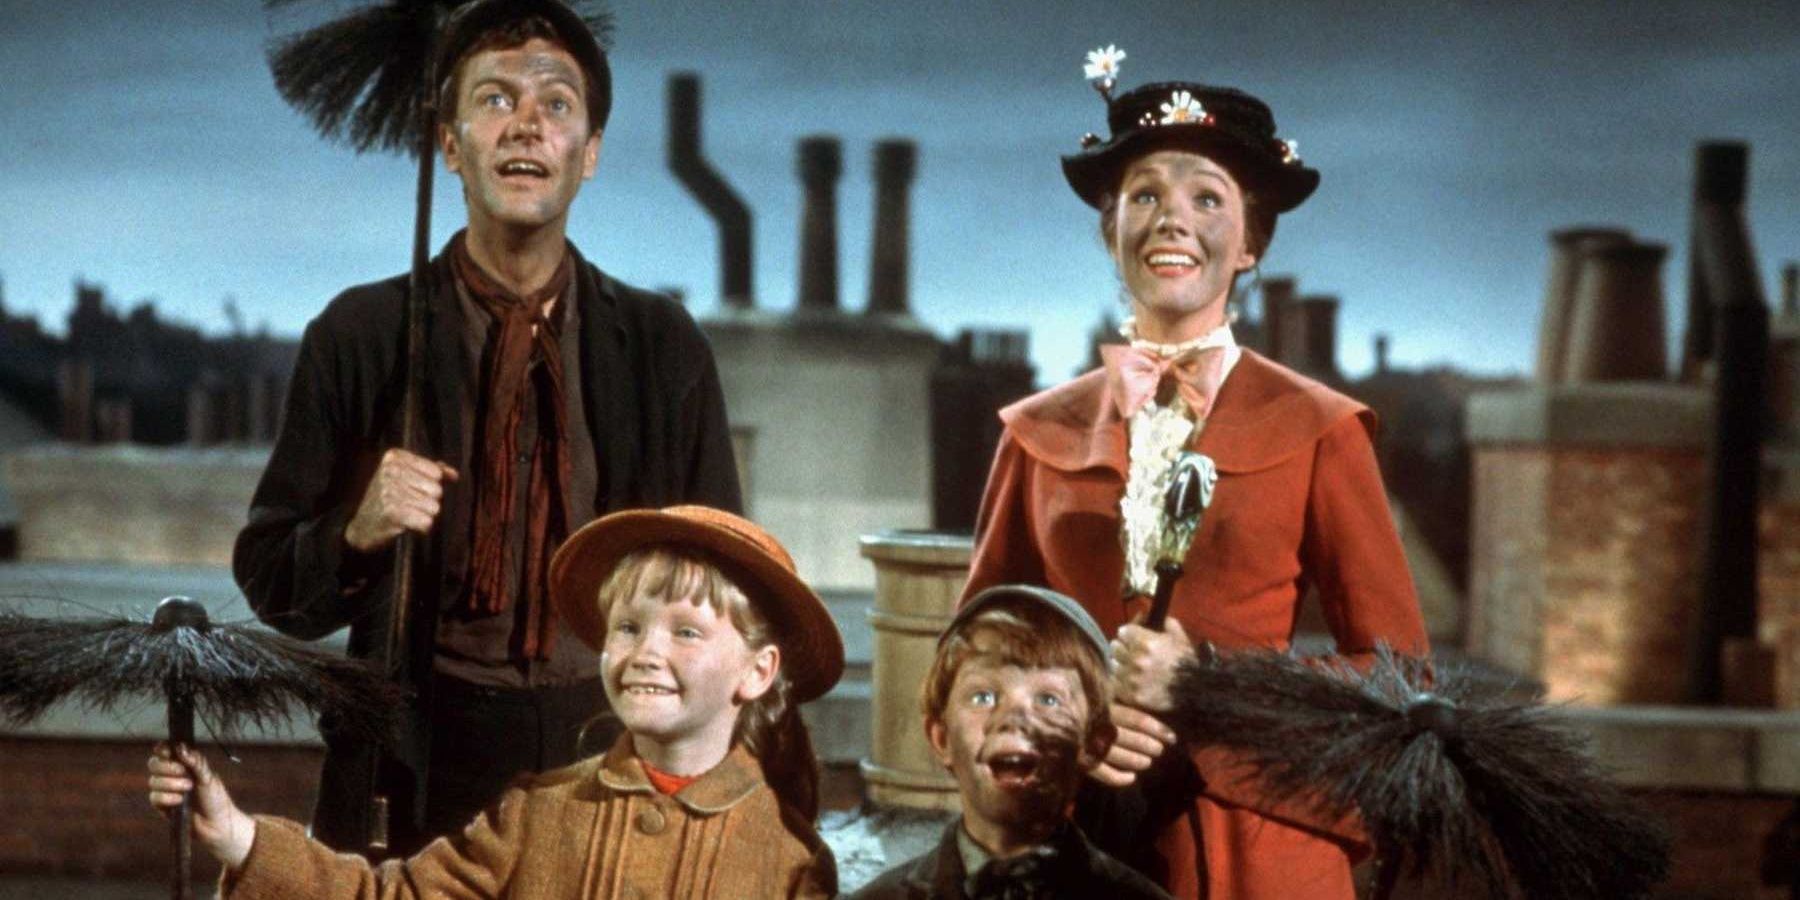 Mary Poppins (Julie Andrews) and Bert (Dick Van Dyke) with Banks kids in Disney film &quot;Mary Poppins.&quot;